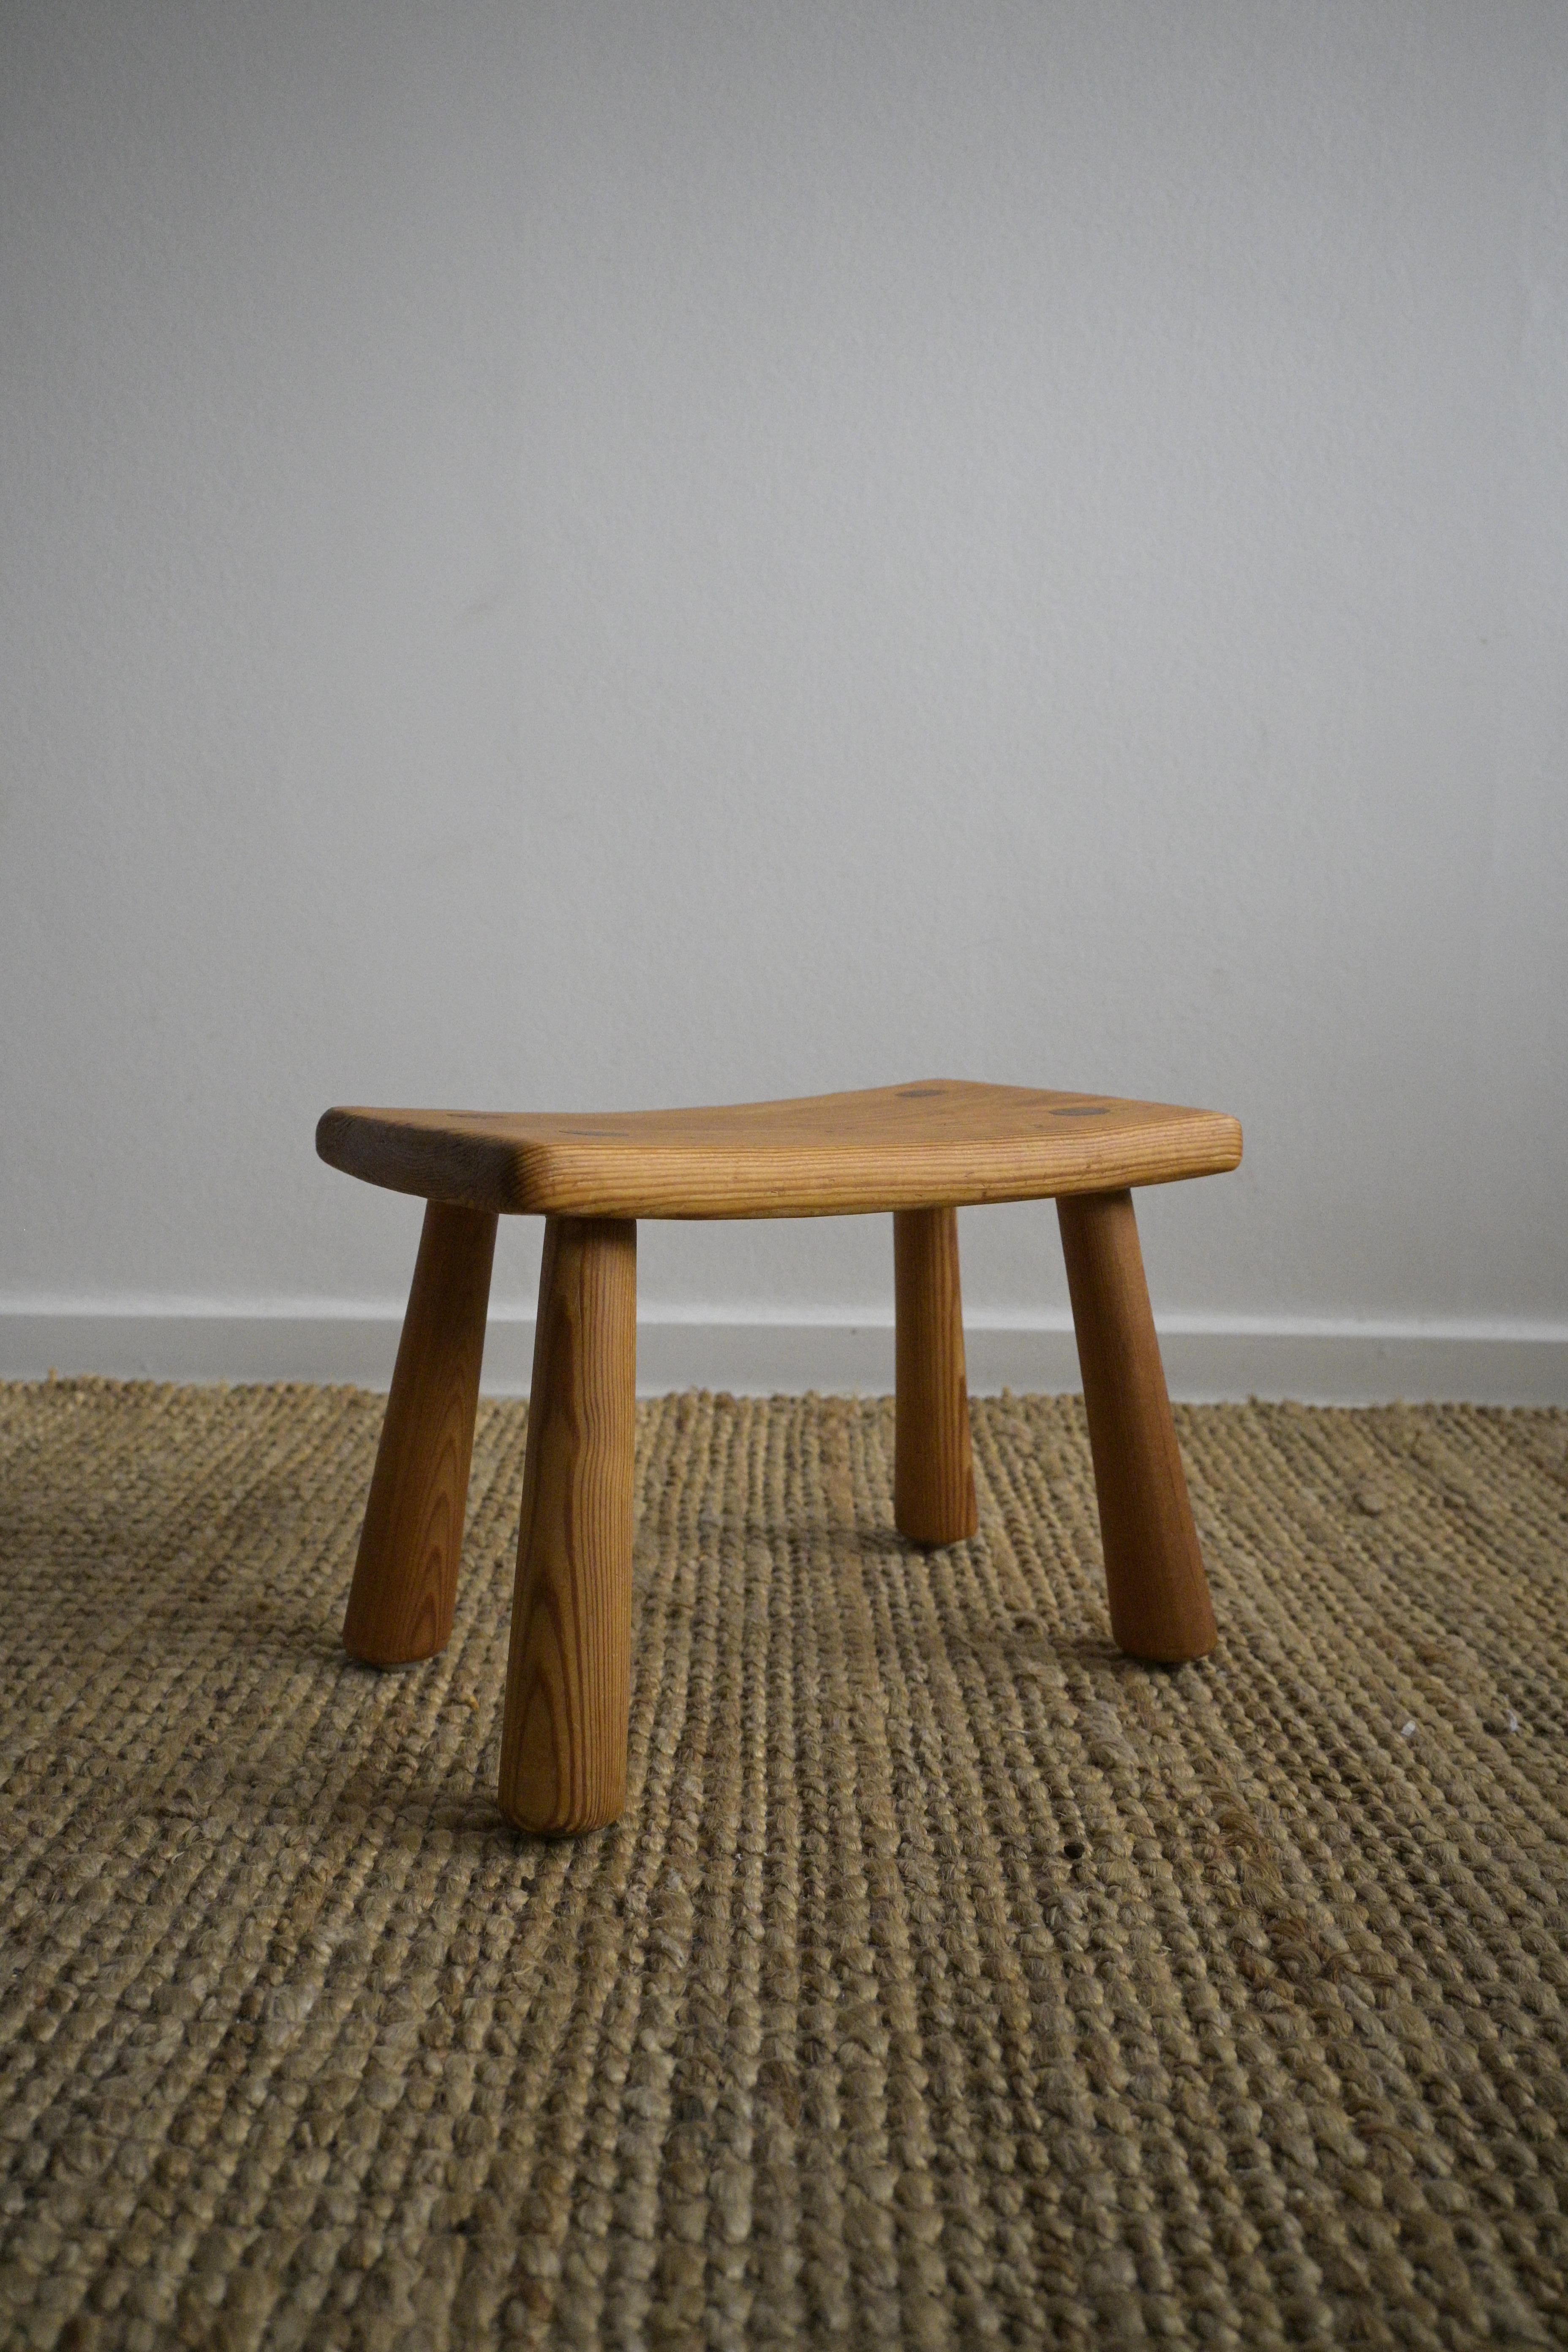 Small Swedish Stool ca 1960s

The stool has chunky legs and shows good wear consistent with age and use.

Made out of pine wood.

Heigth: 21 cm/8.2 inch
Depth: 19cm/7.4 inch
Width: 29 cm/11.4 inch